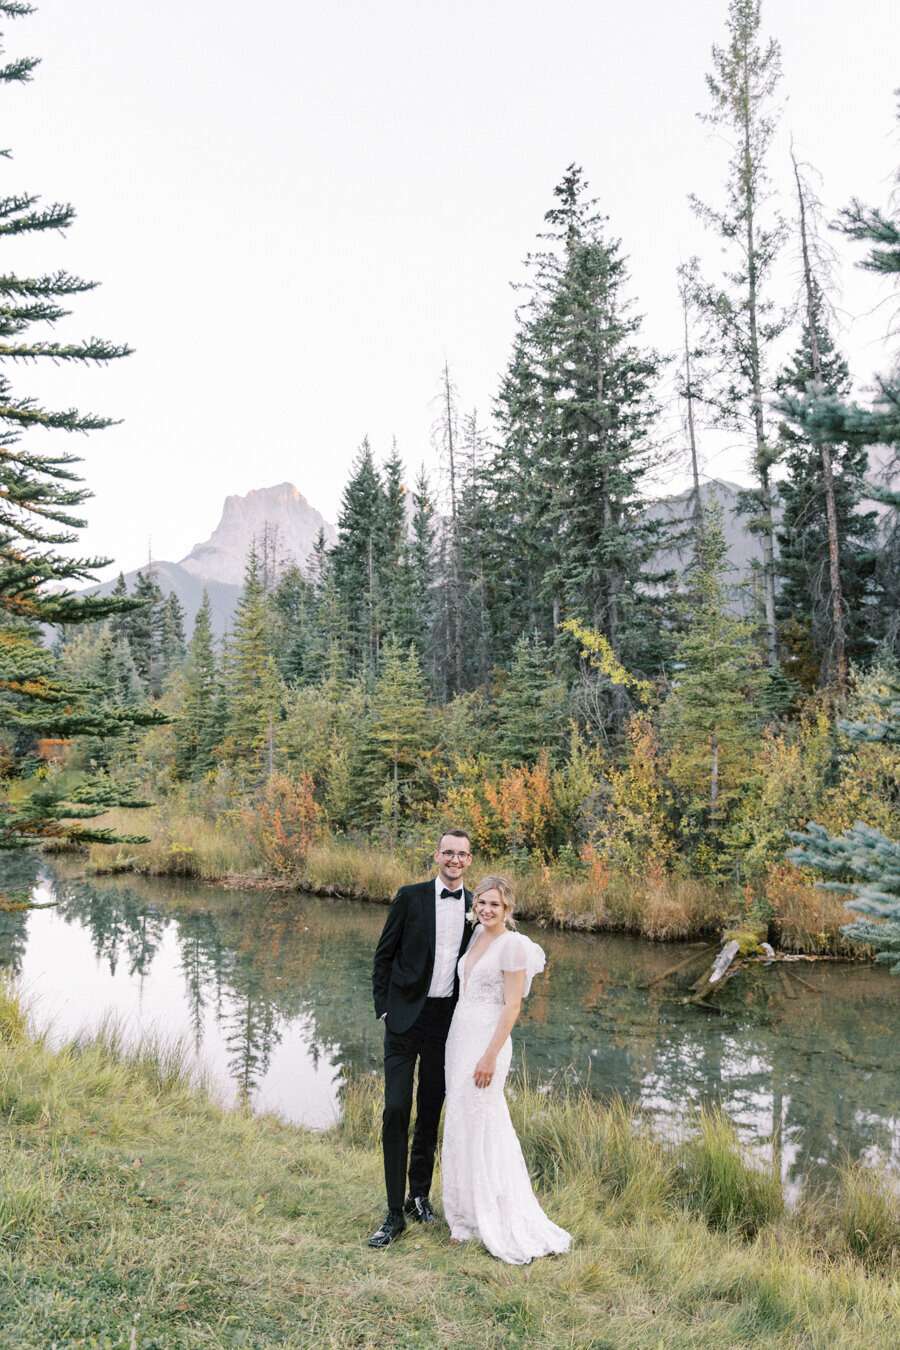 A bride and groom posing together by the river during their Calgary wedding reception